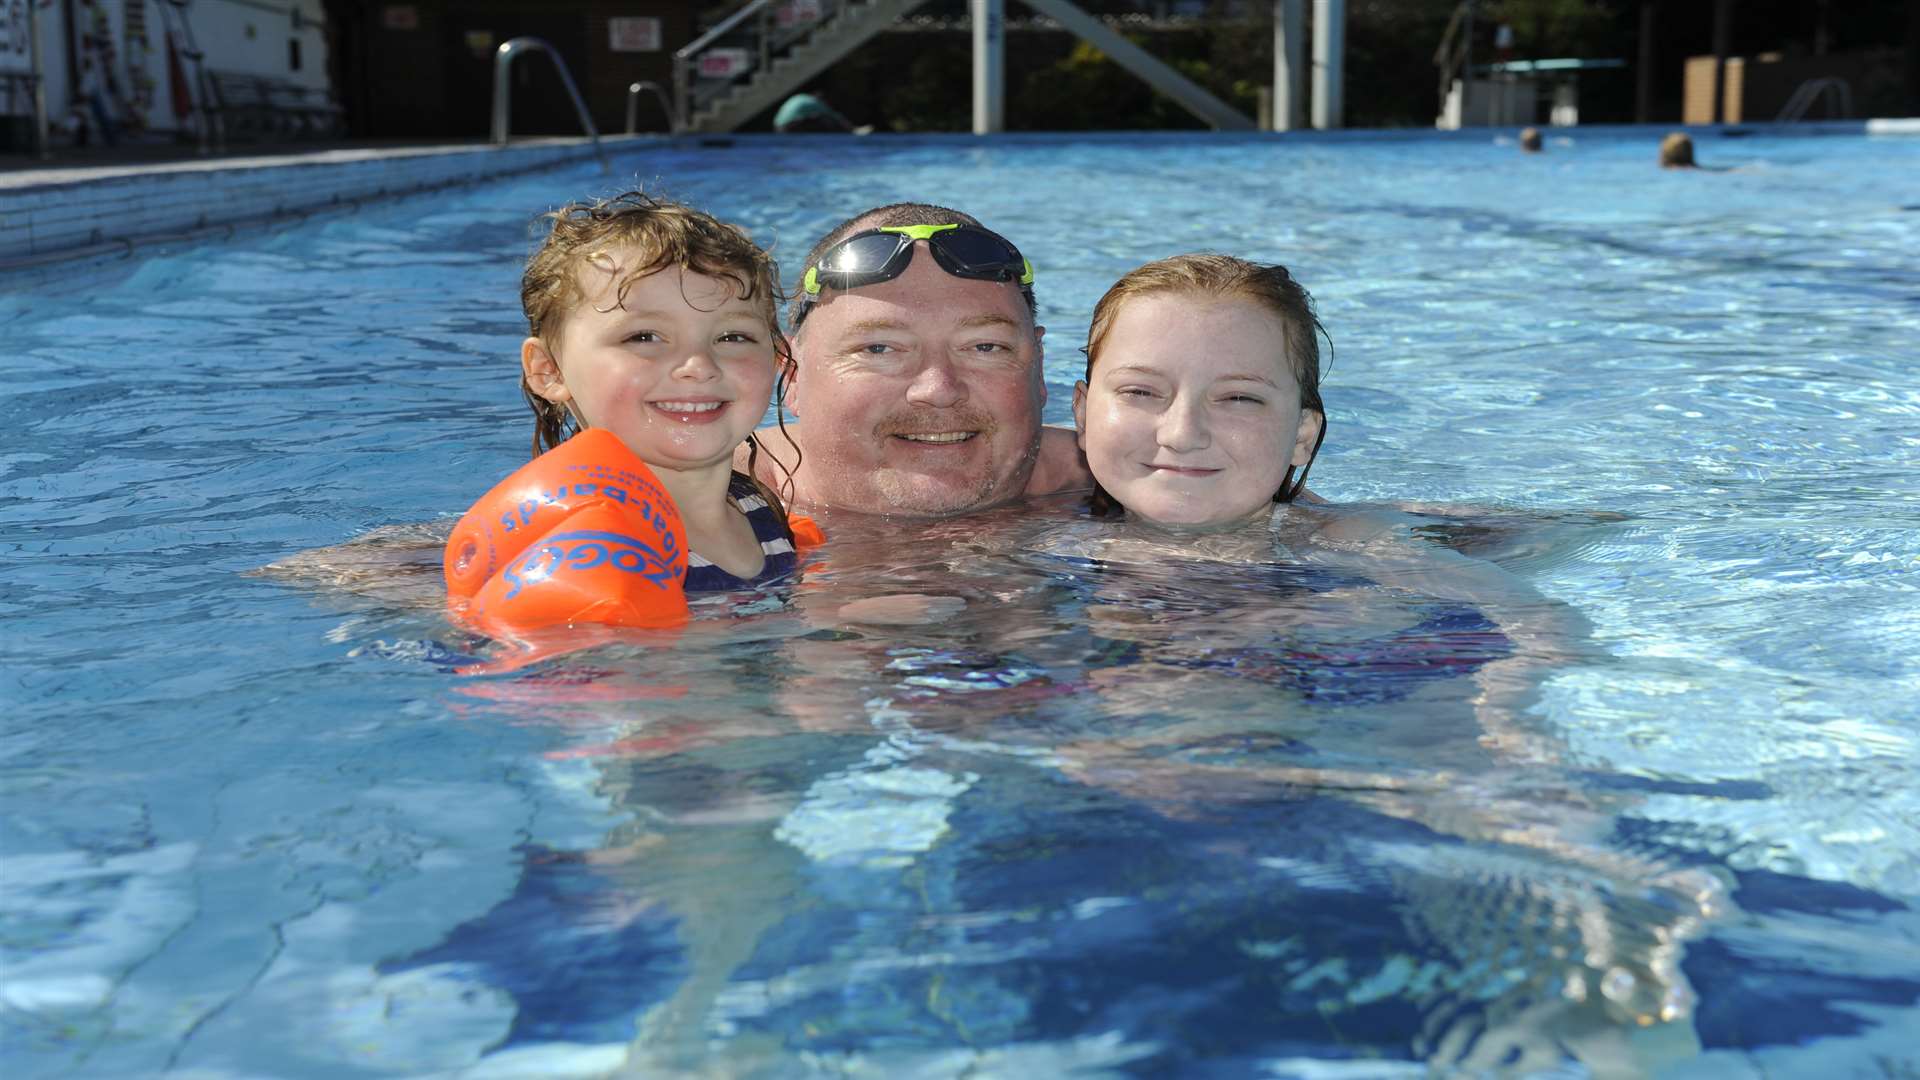 Bring your family to one of Kent's outdoor pools or splash areas